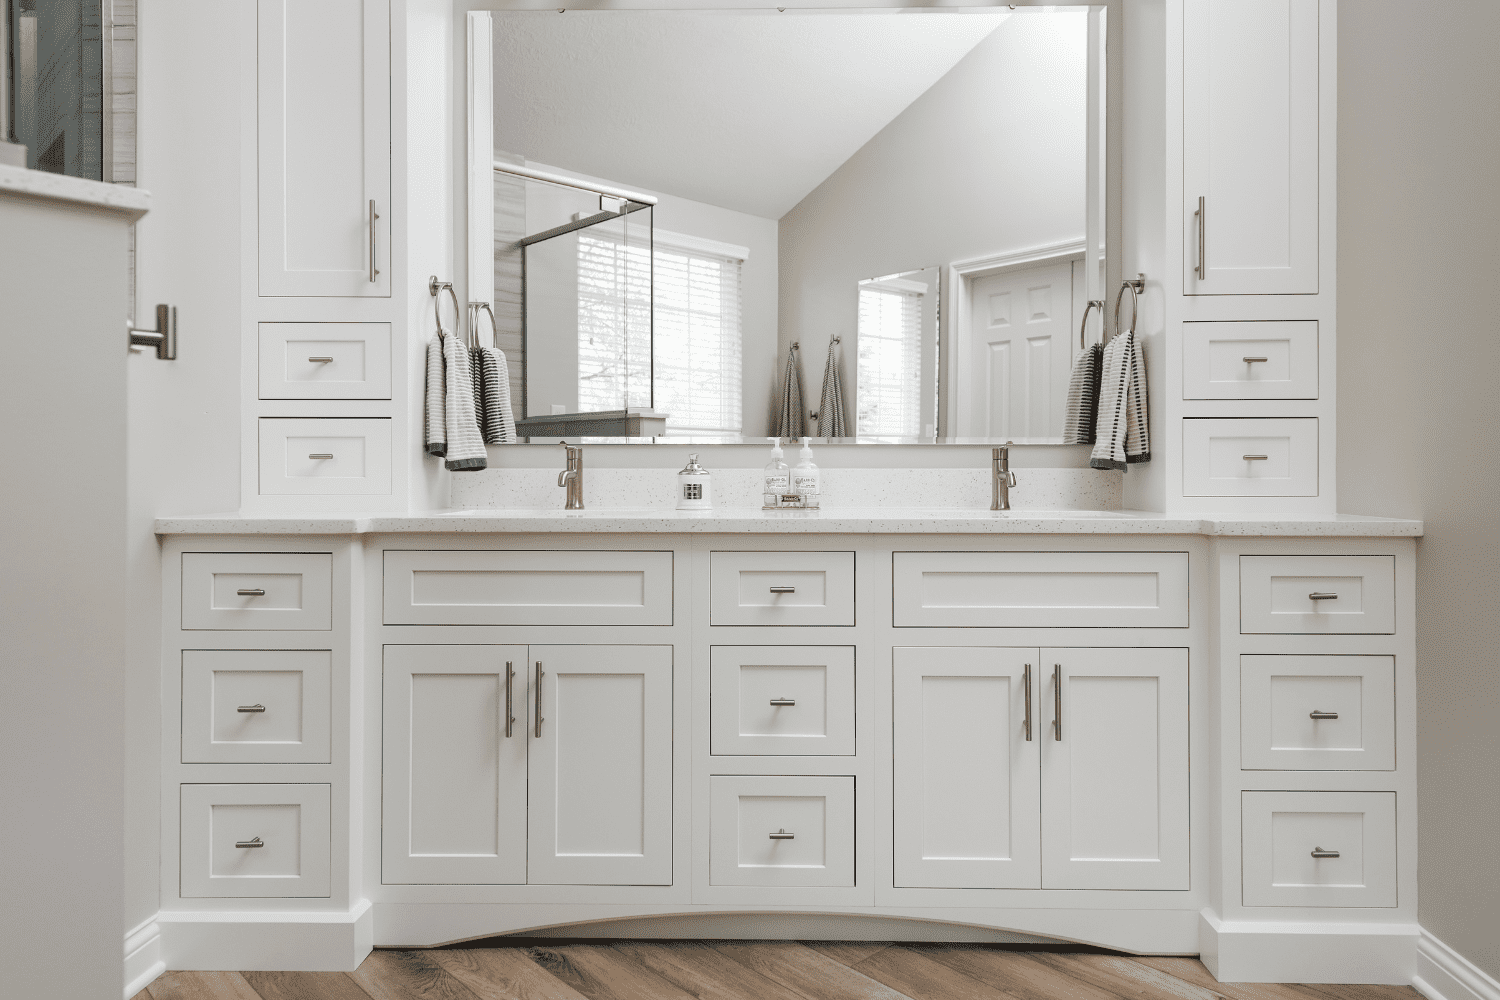 Nicholas Design Build | A bathroom remodel with white cabinets and a large mirror.